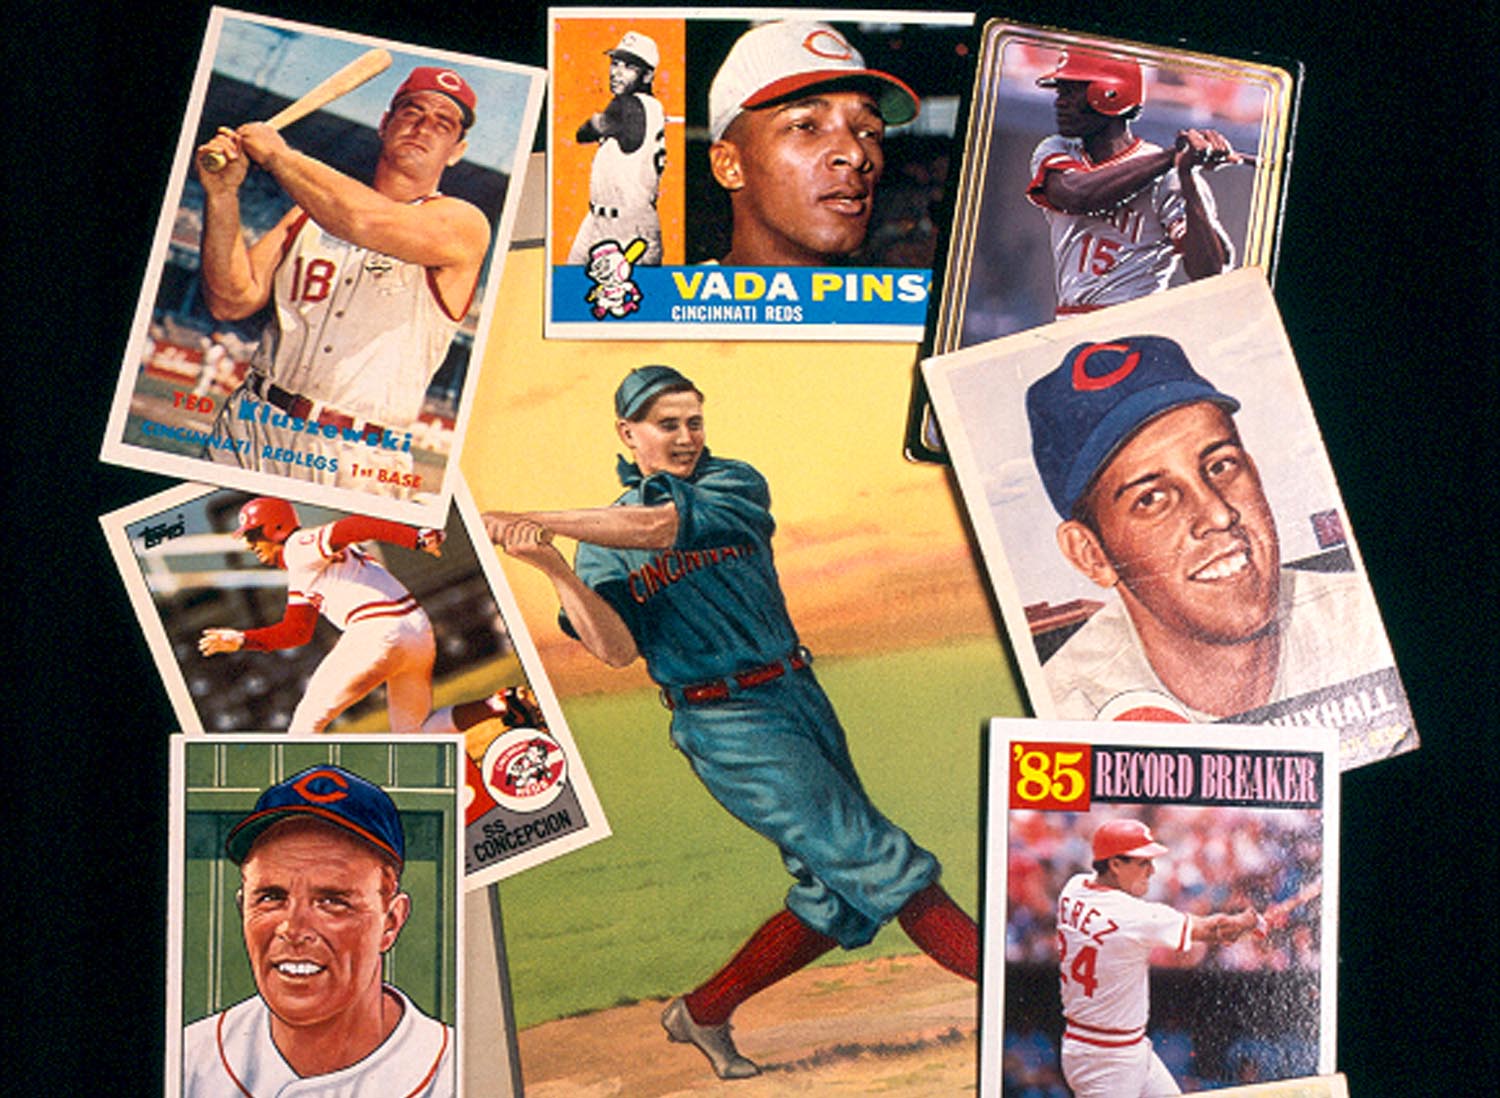 A collage of baseball cards